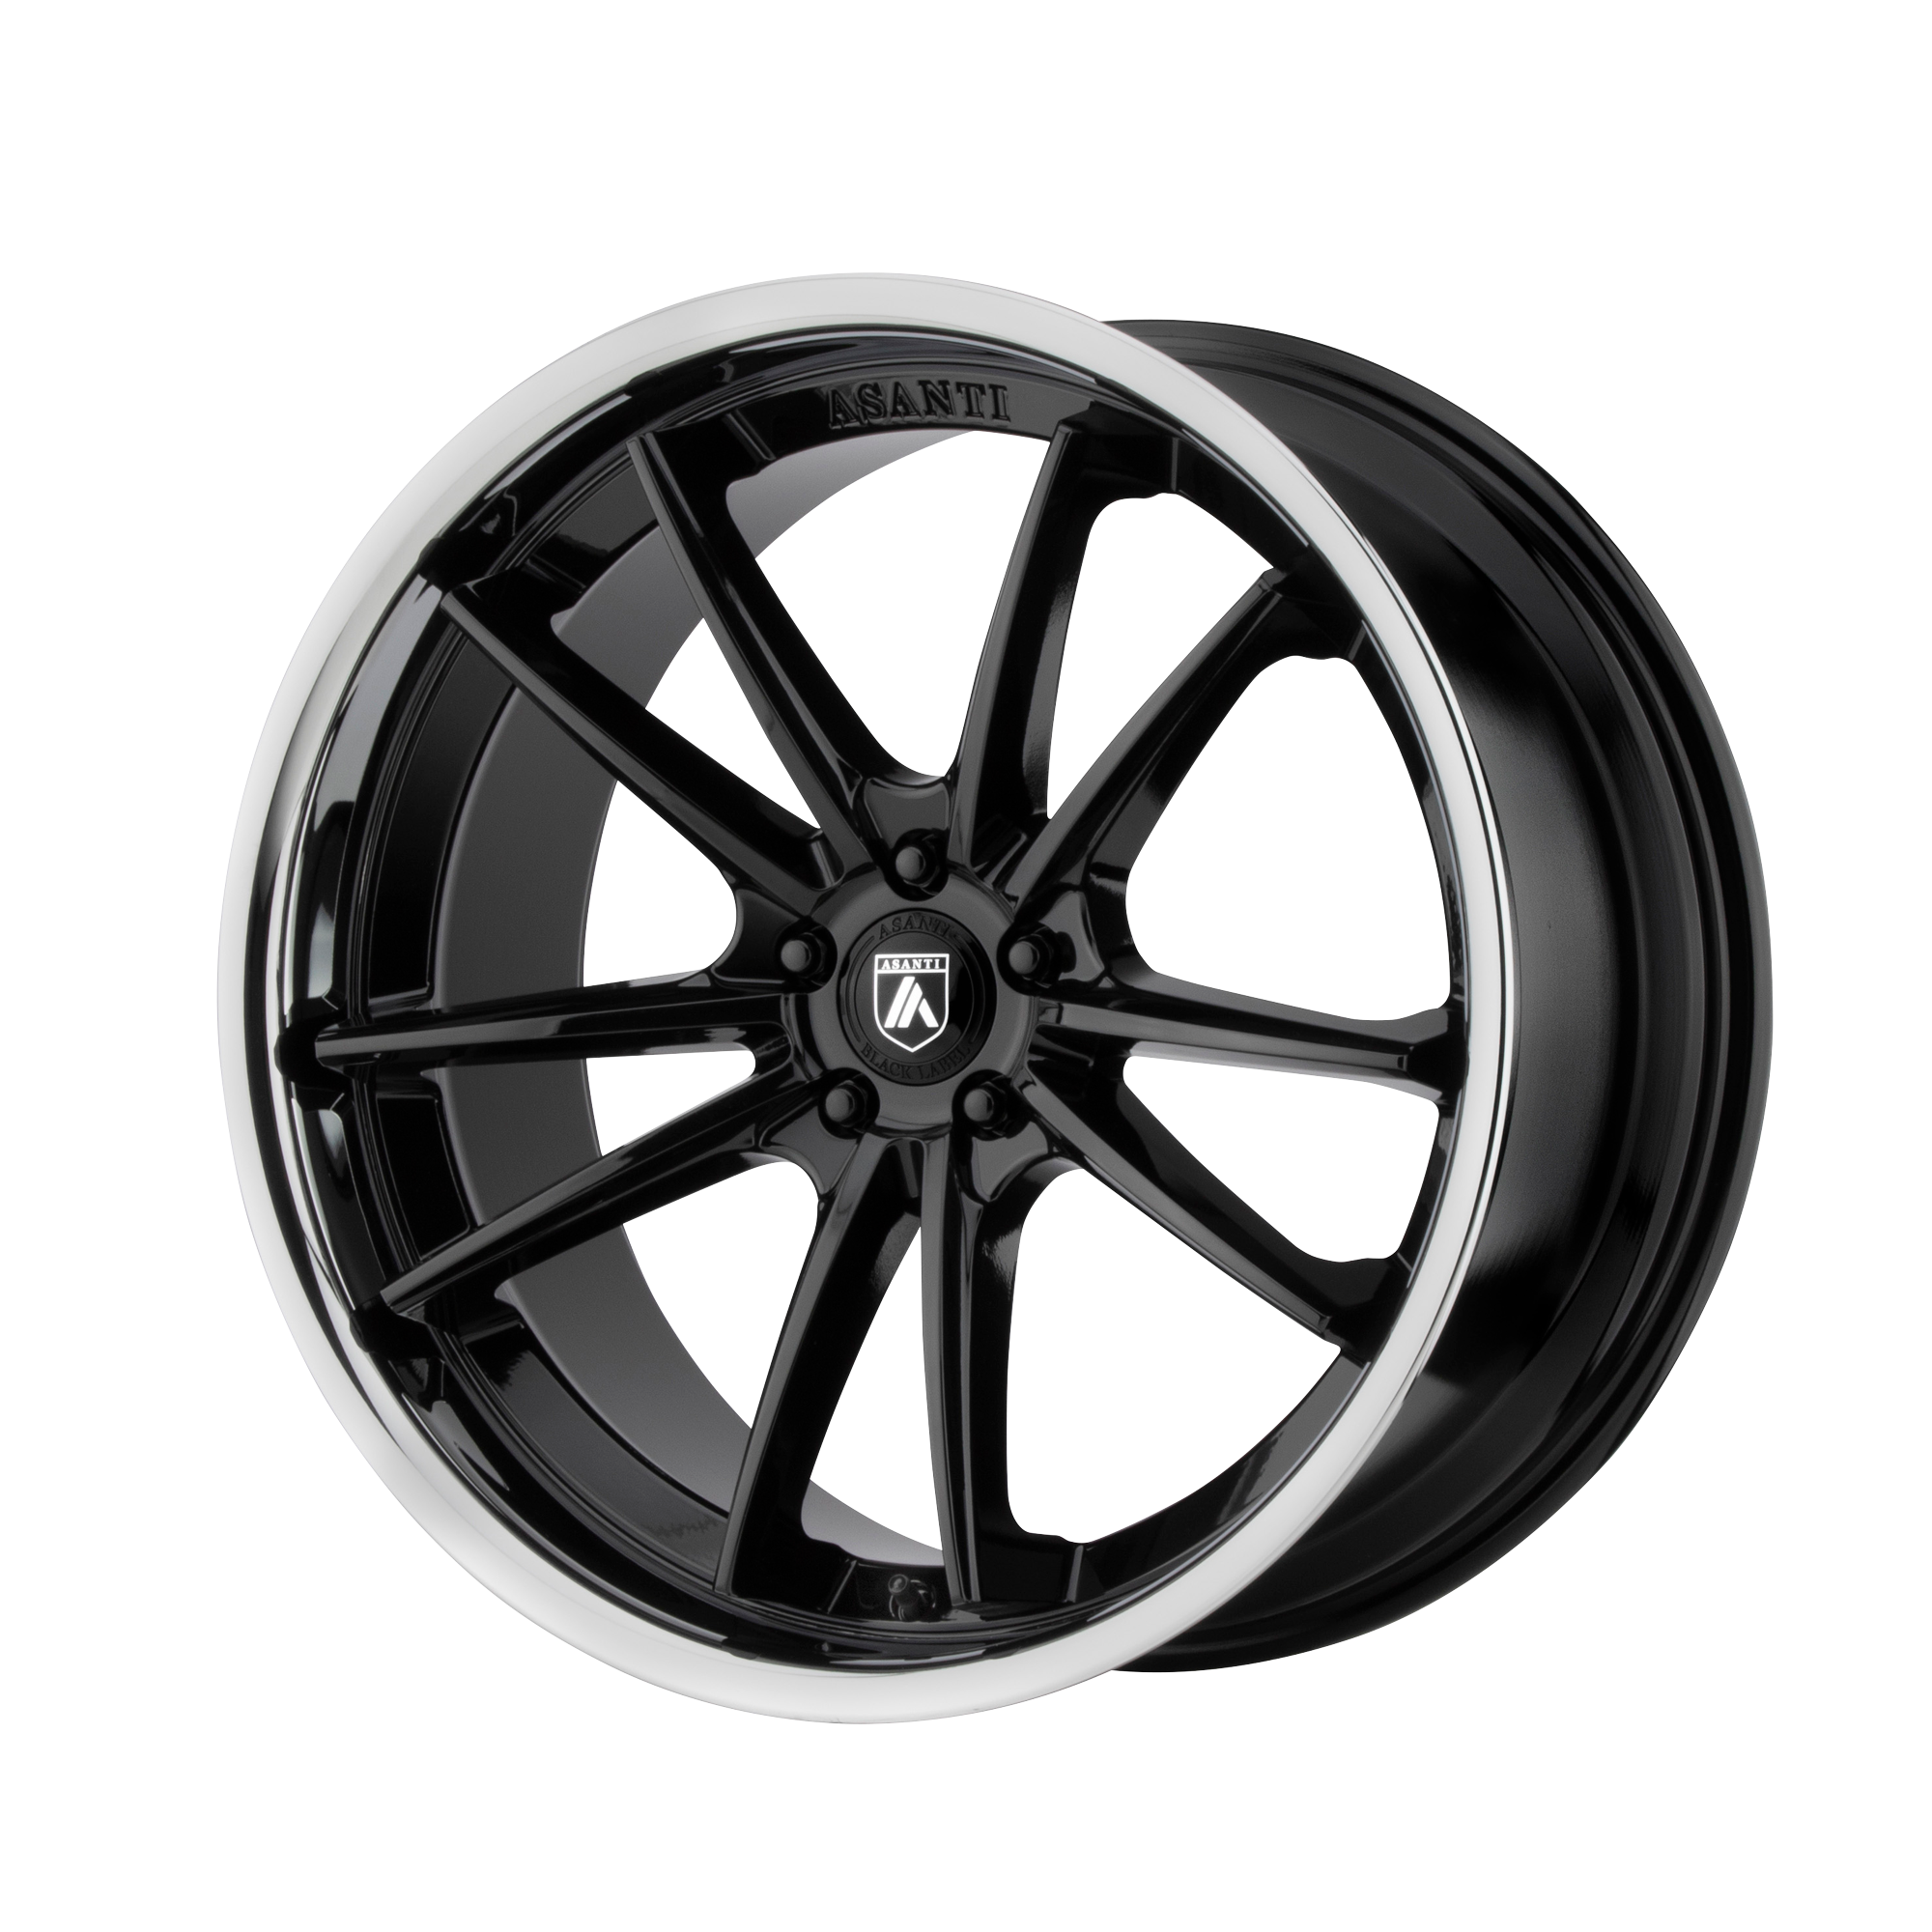 DELTA 20x10.5 Blank GLOSS BLACK W/ CHROME LIP (20 mm) - Tires and Engine Performance